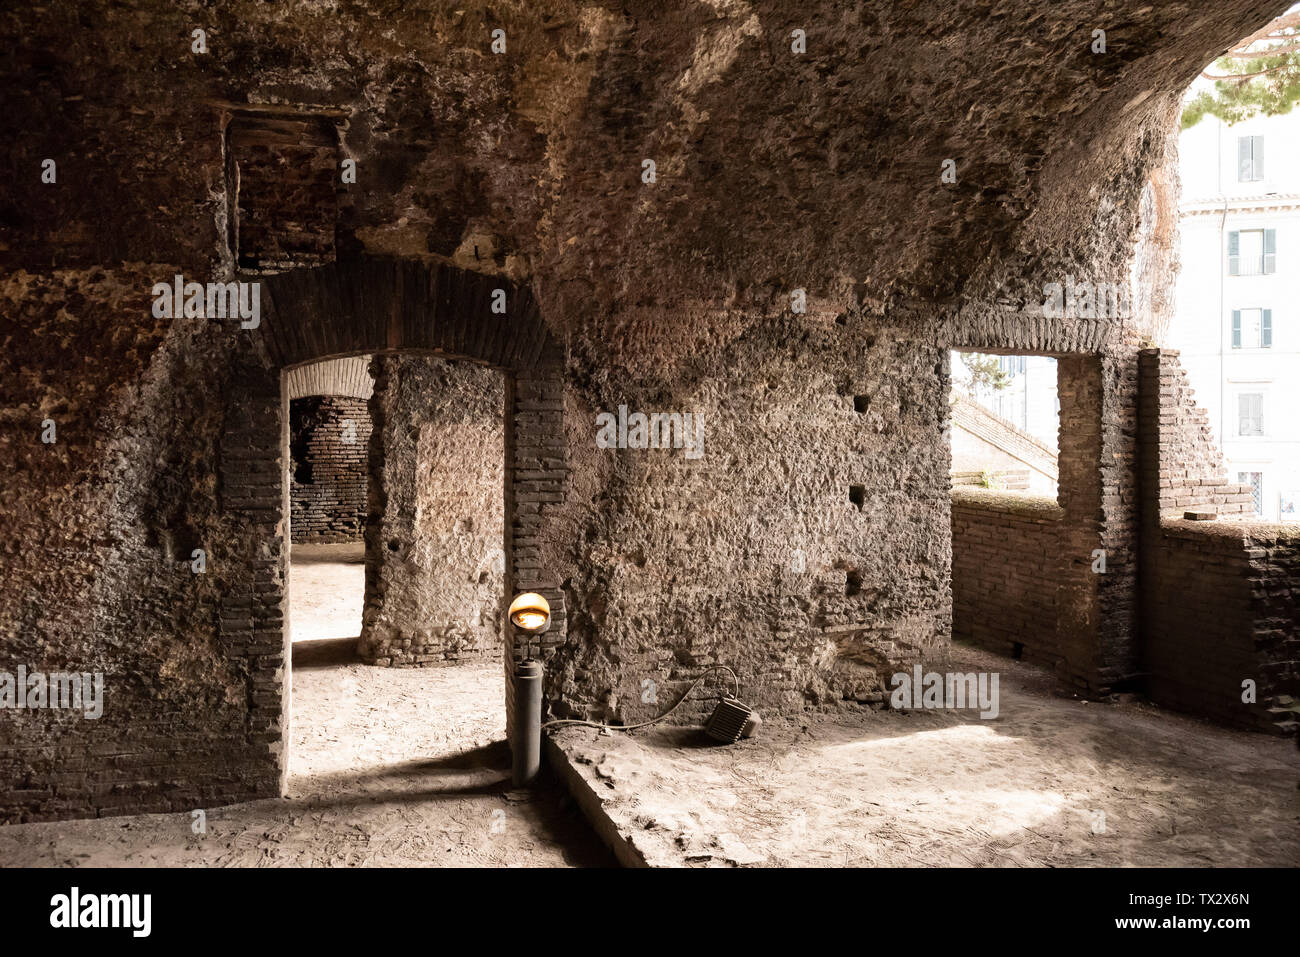 Rome. Italy. Insula dell' Ara Coeli, remains of a Roman apartment block from the 2nd century AD, interior view of the third floor. Stock Photo